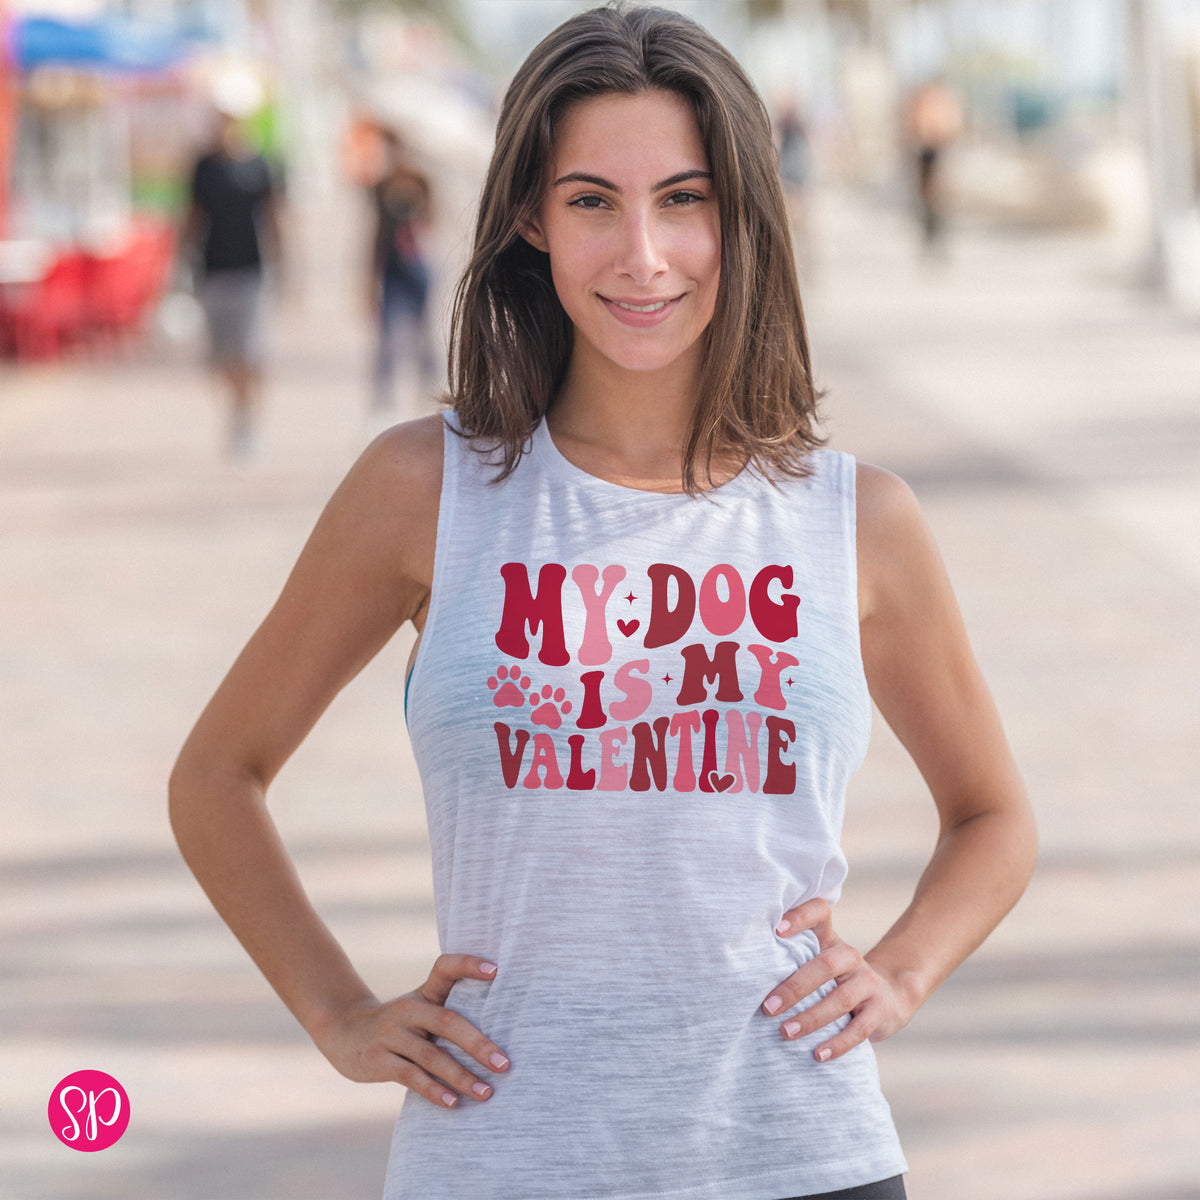 My Dog is My Valentine (Groovy Text) Muscle Tee